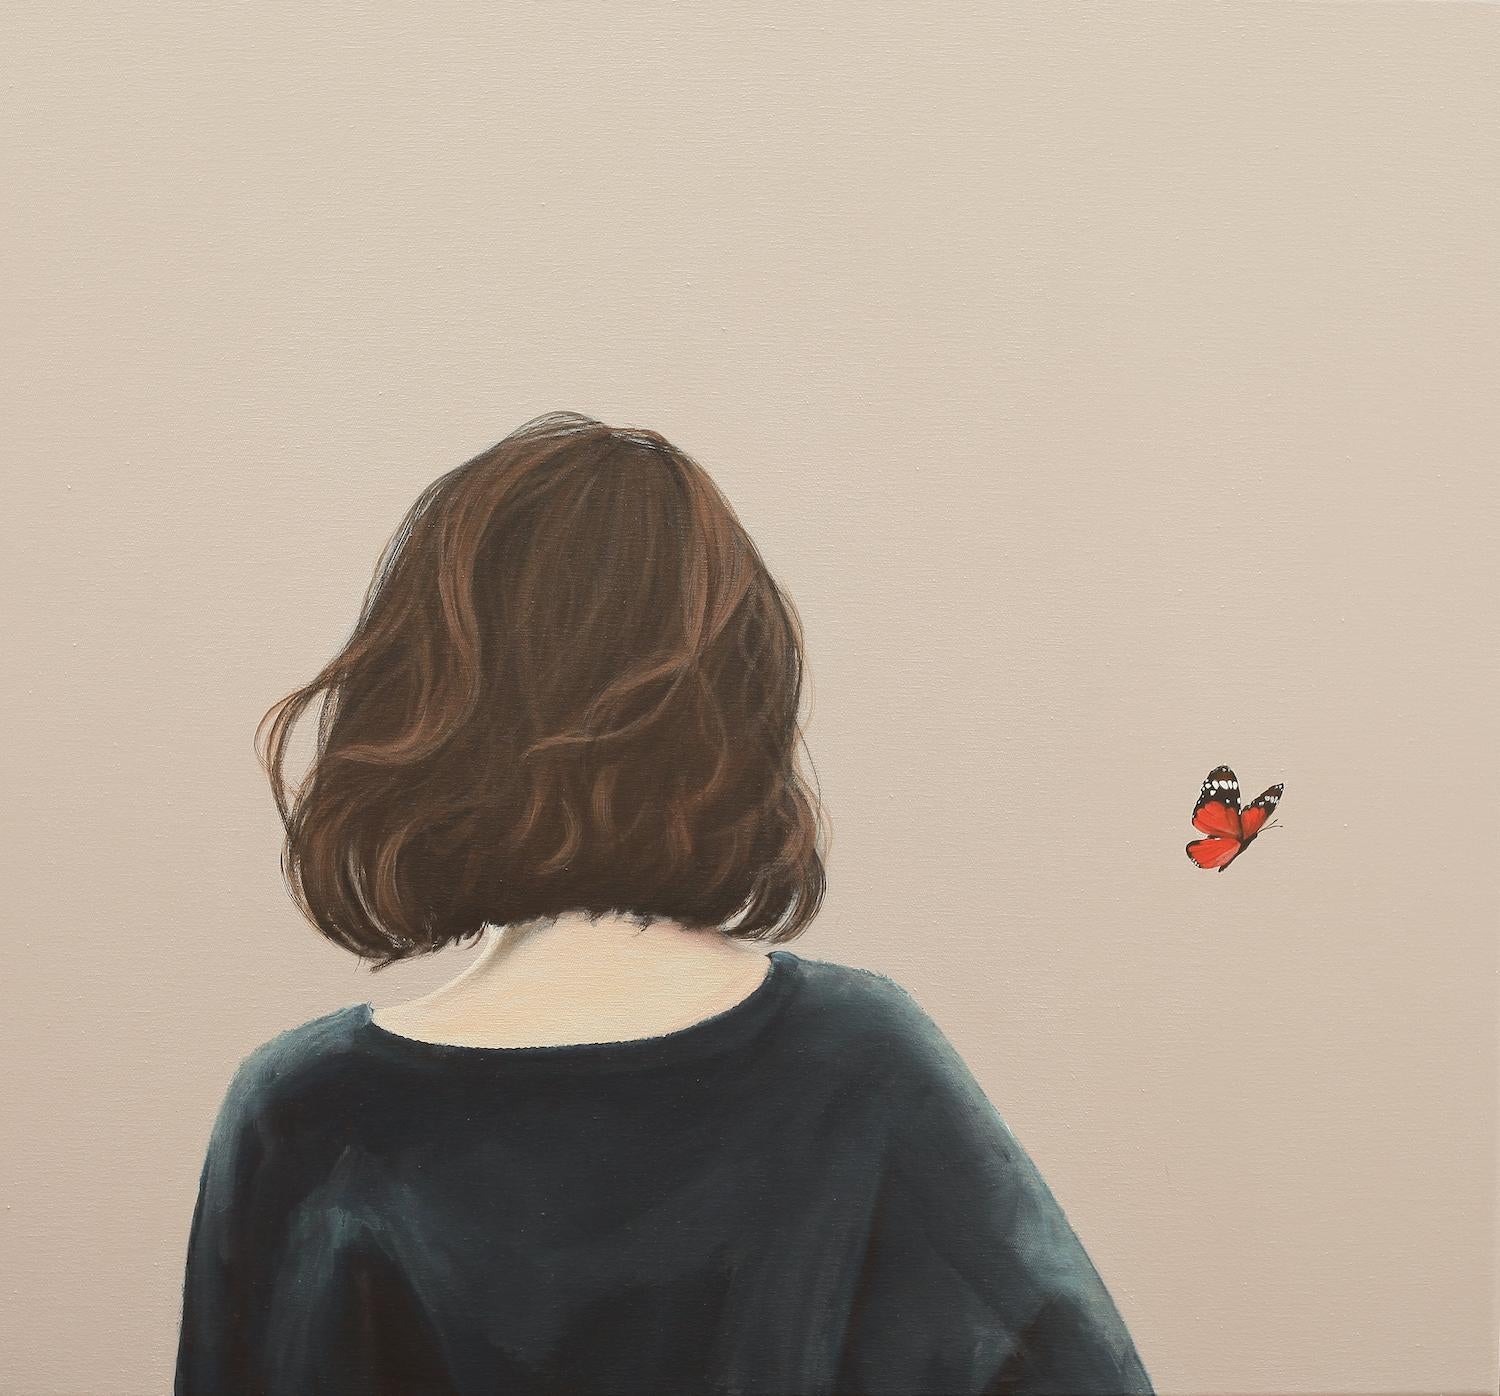 Karoline Kroiss Figurative Painting - ''It seemed like a Butterfly " Portrait Painting of a Girl with Butterfly